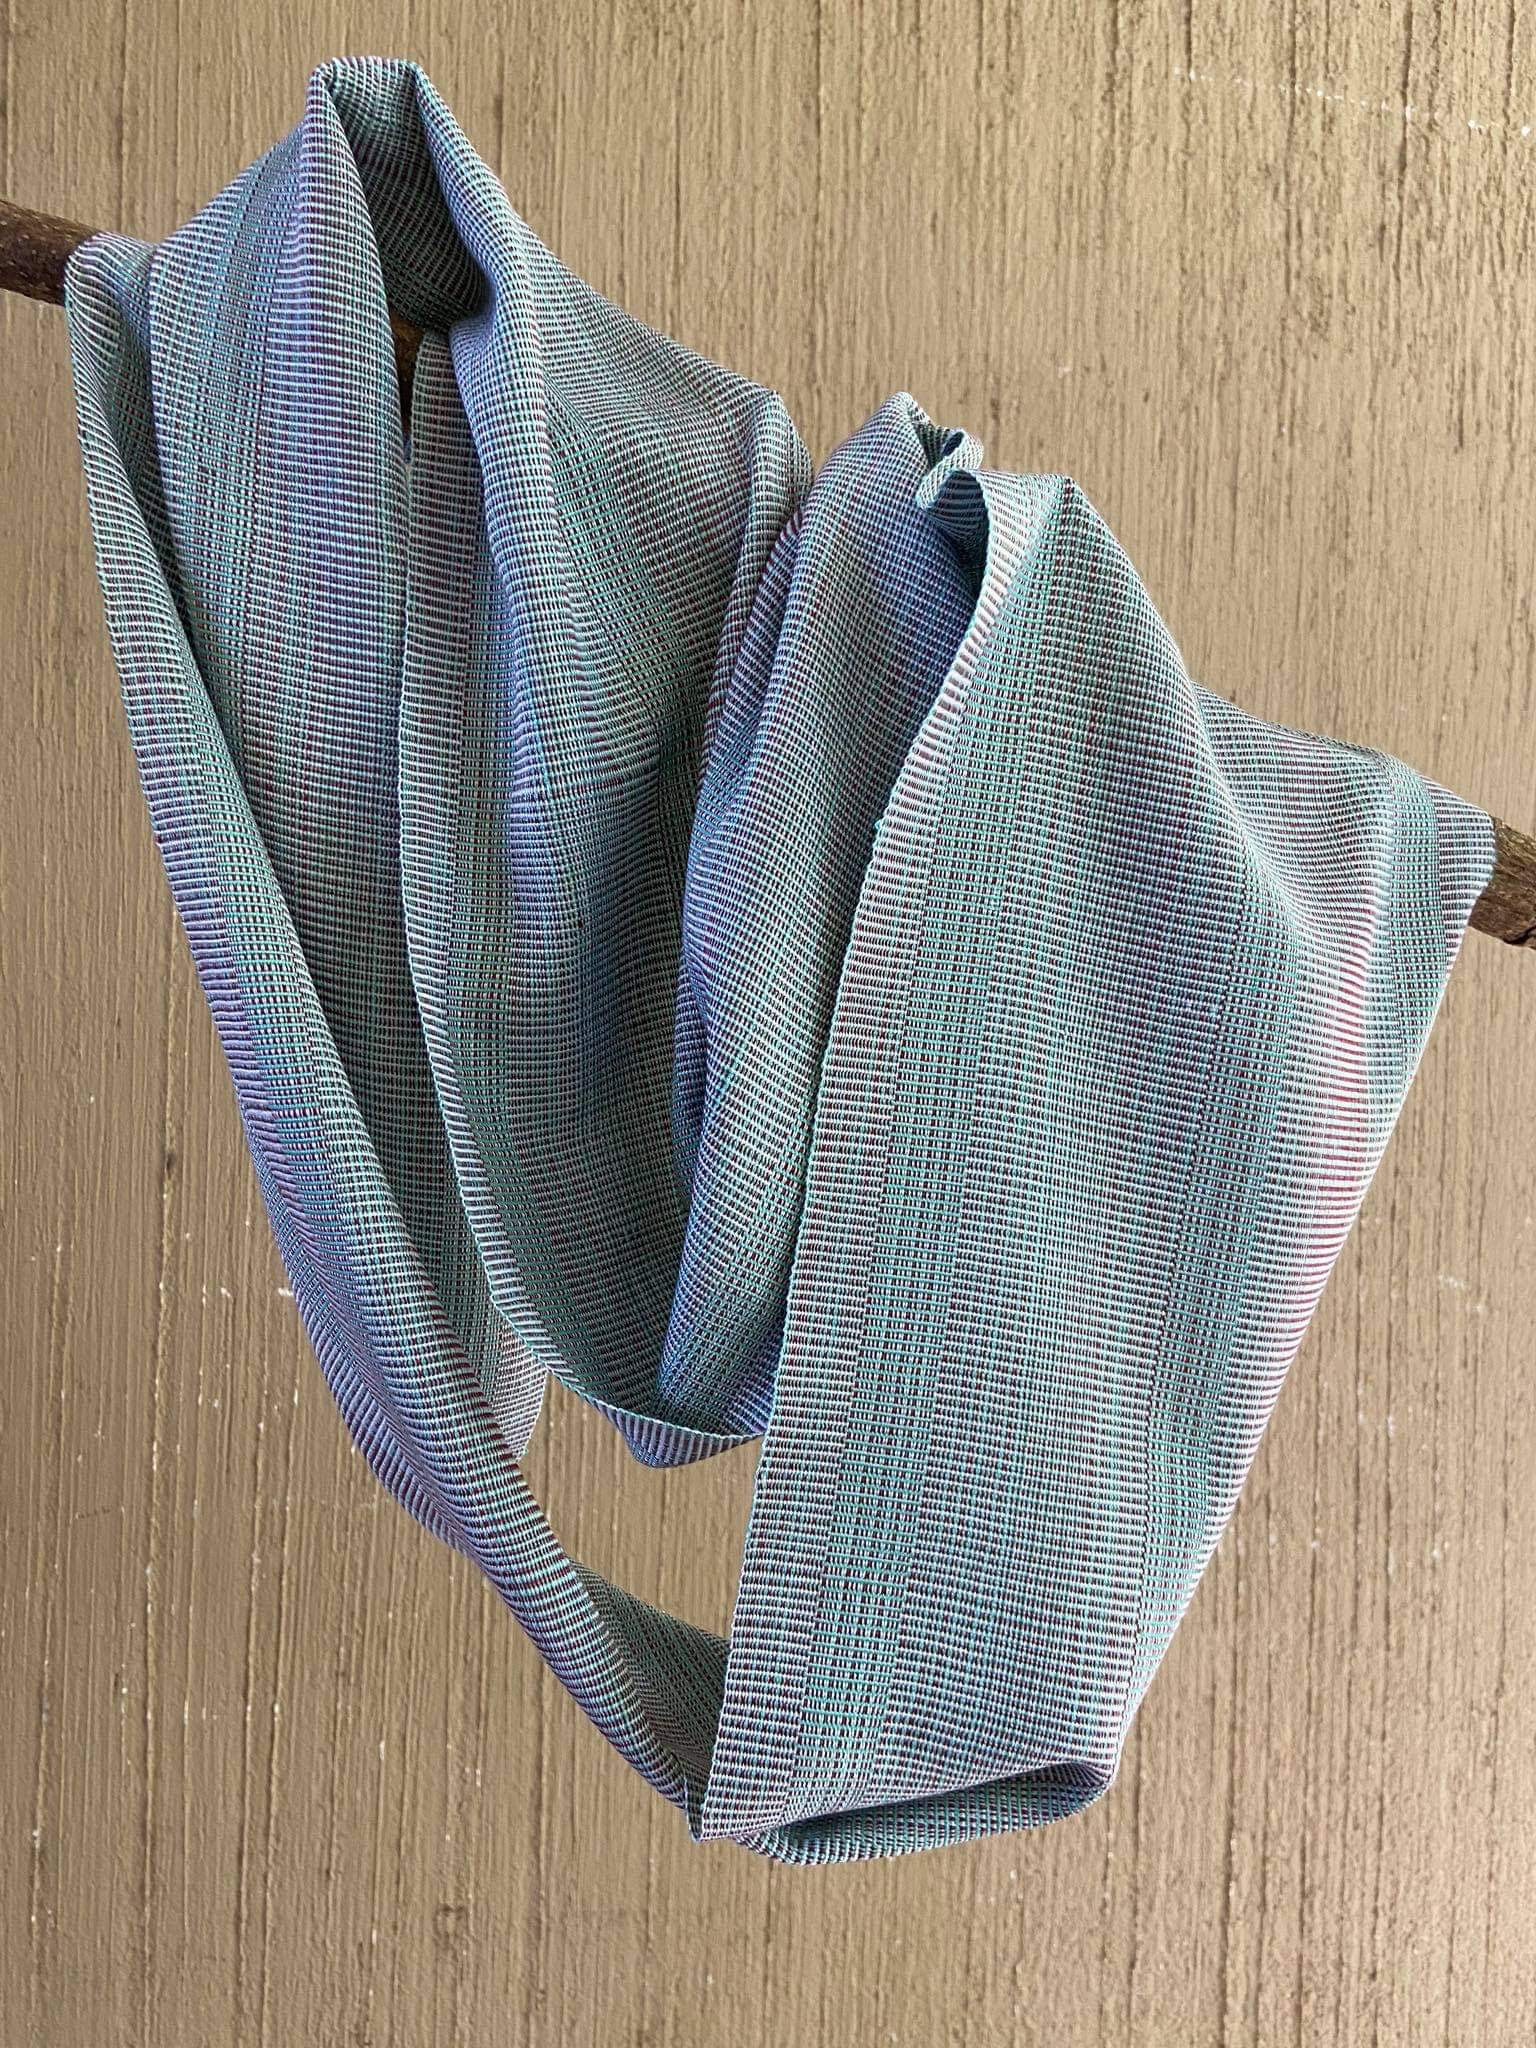 Maroon and Teal Infinity Scarf - Fair Trade Guatemalan Scarves